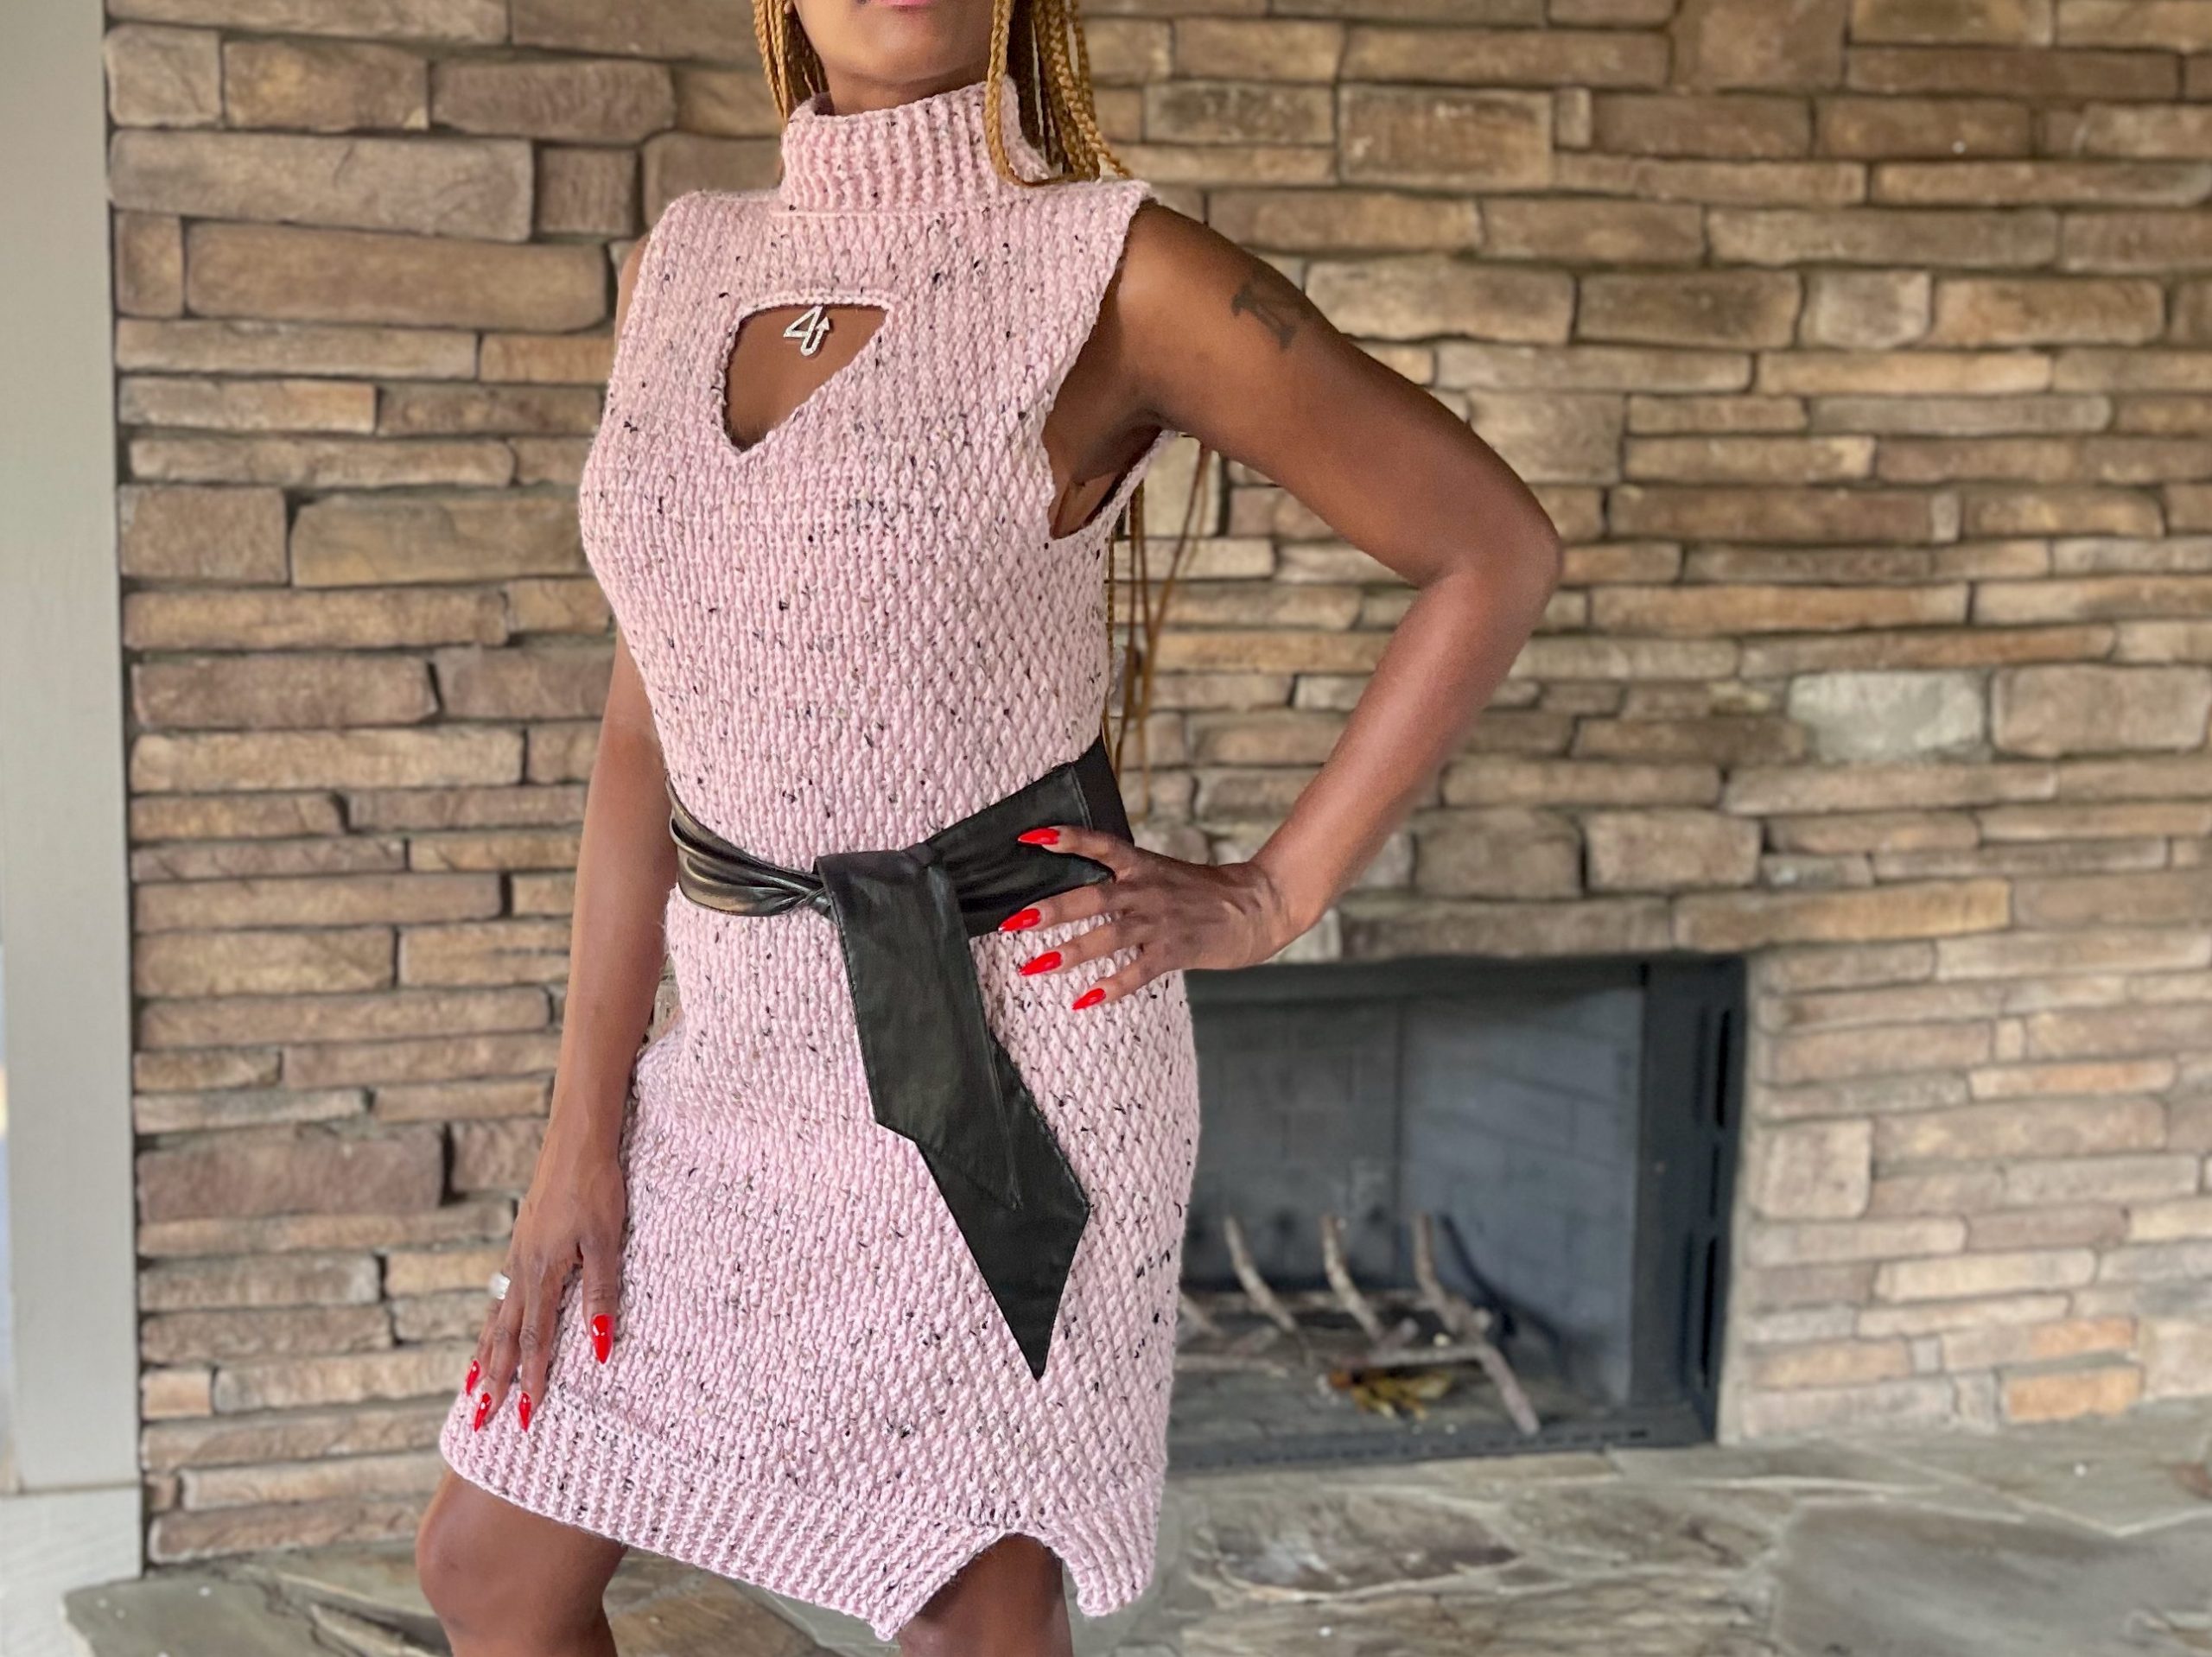 Textured, pink crochet dress that is sleeveless and worn with a wide belt tied around the waist.